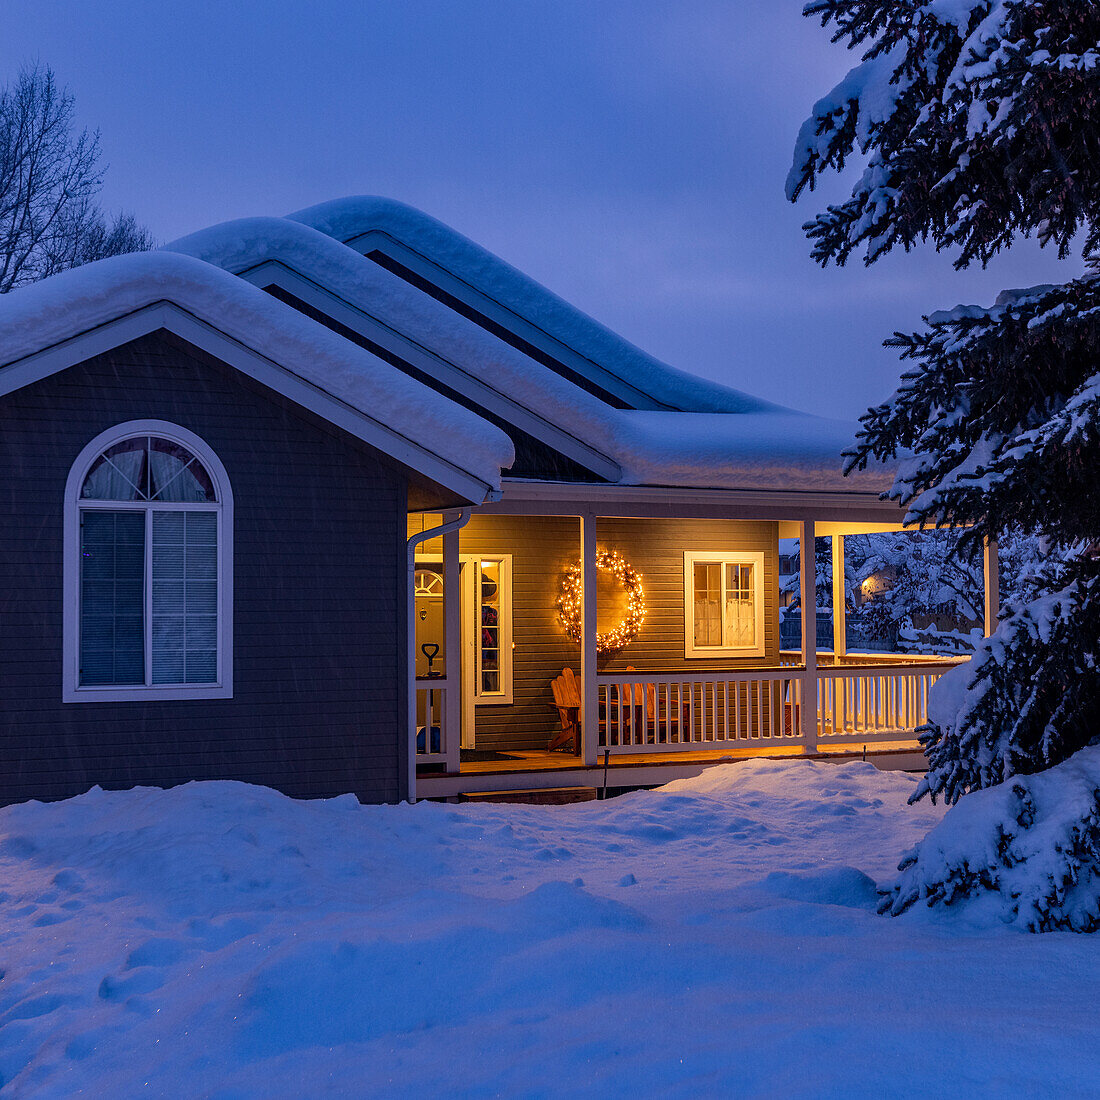 United States, Idaho, Bellevue, Snow covered house with porch lights